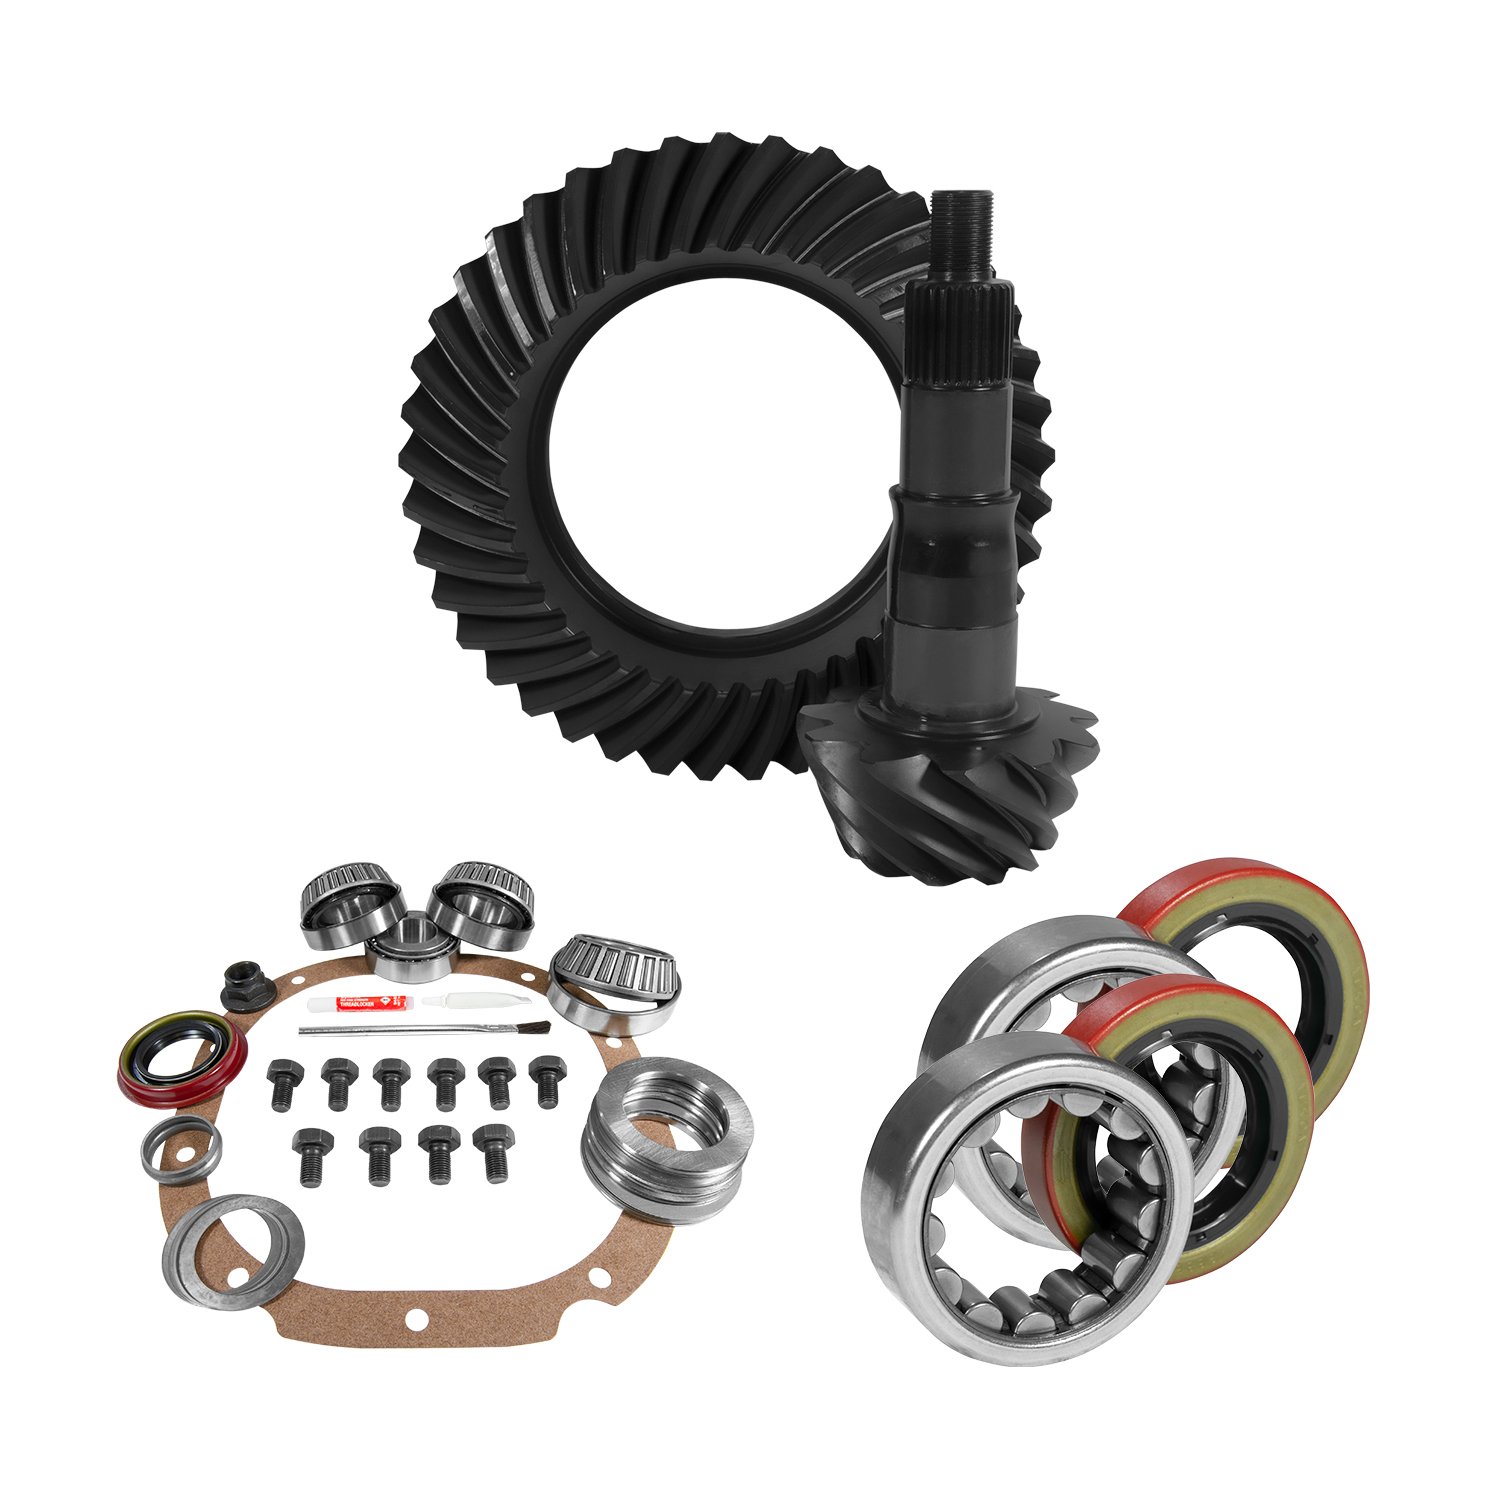 USA Standard 10756 8.8 in. Ford 3.55 Rear Ring & Pinion Install Kit, 2.53 in. Od Axle Bearings & Seals